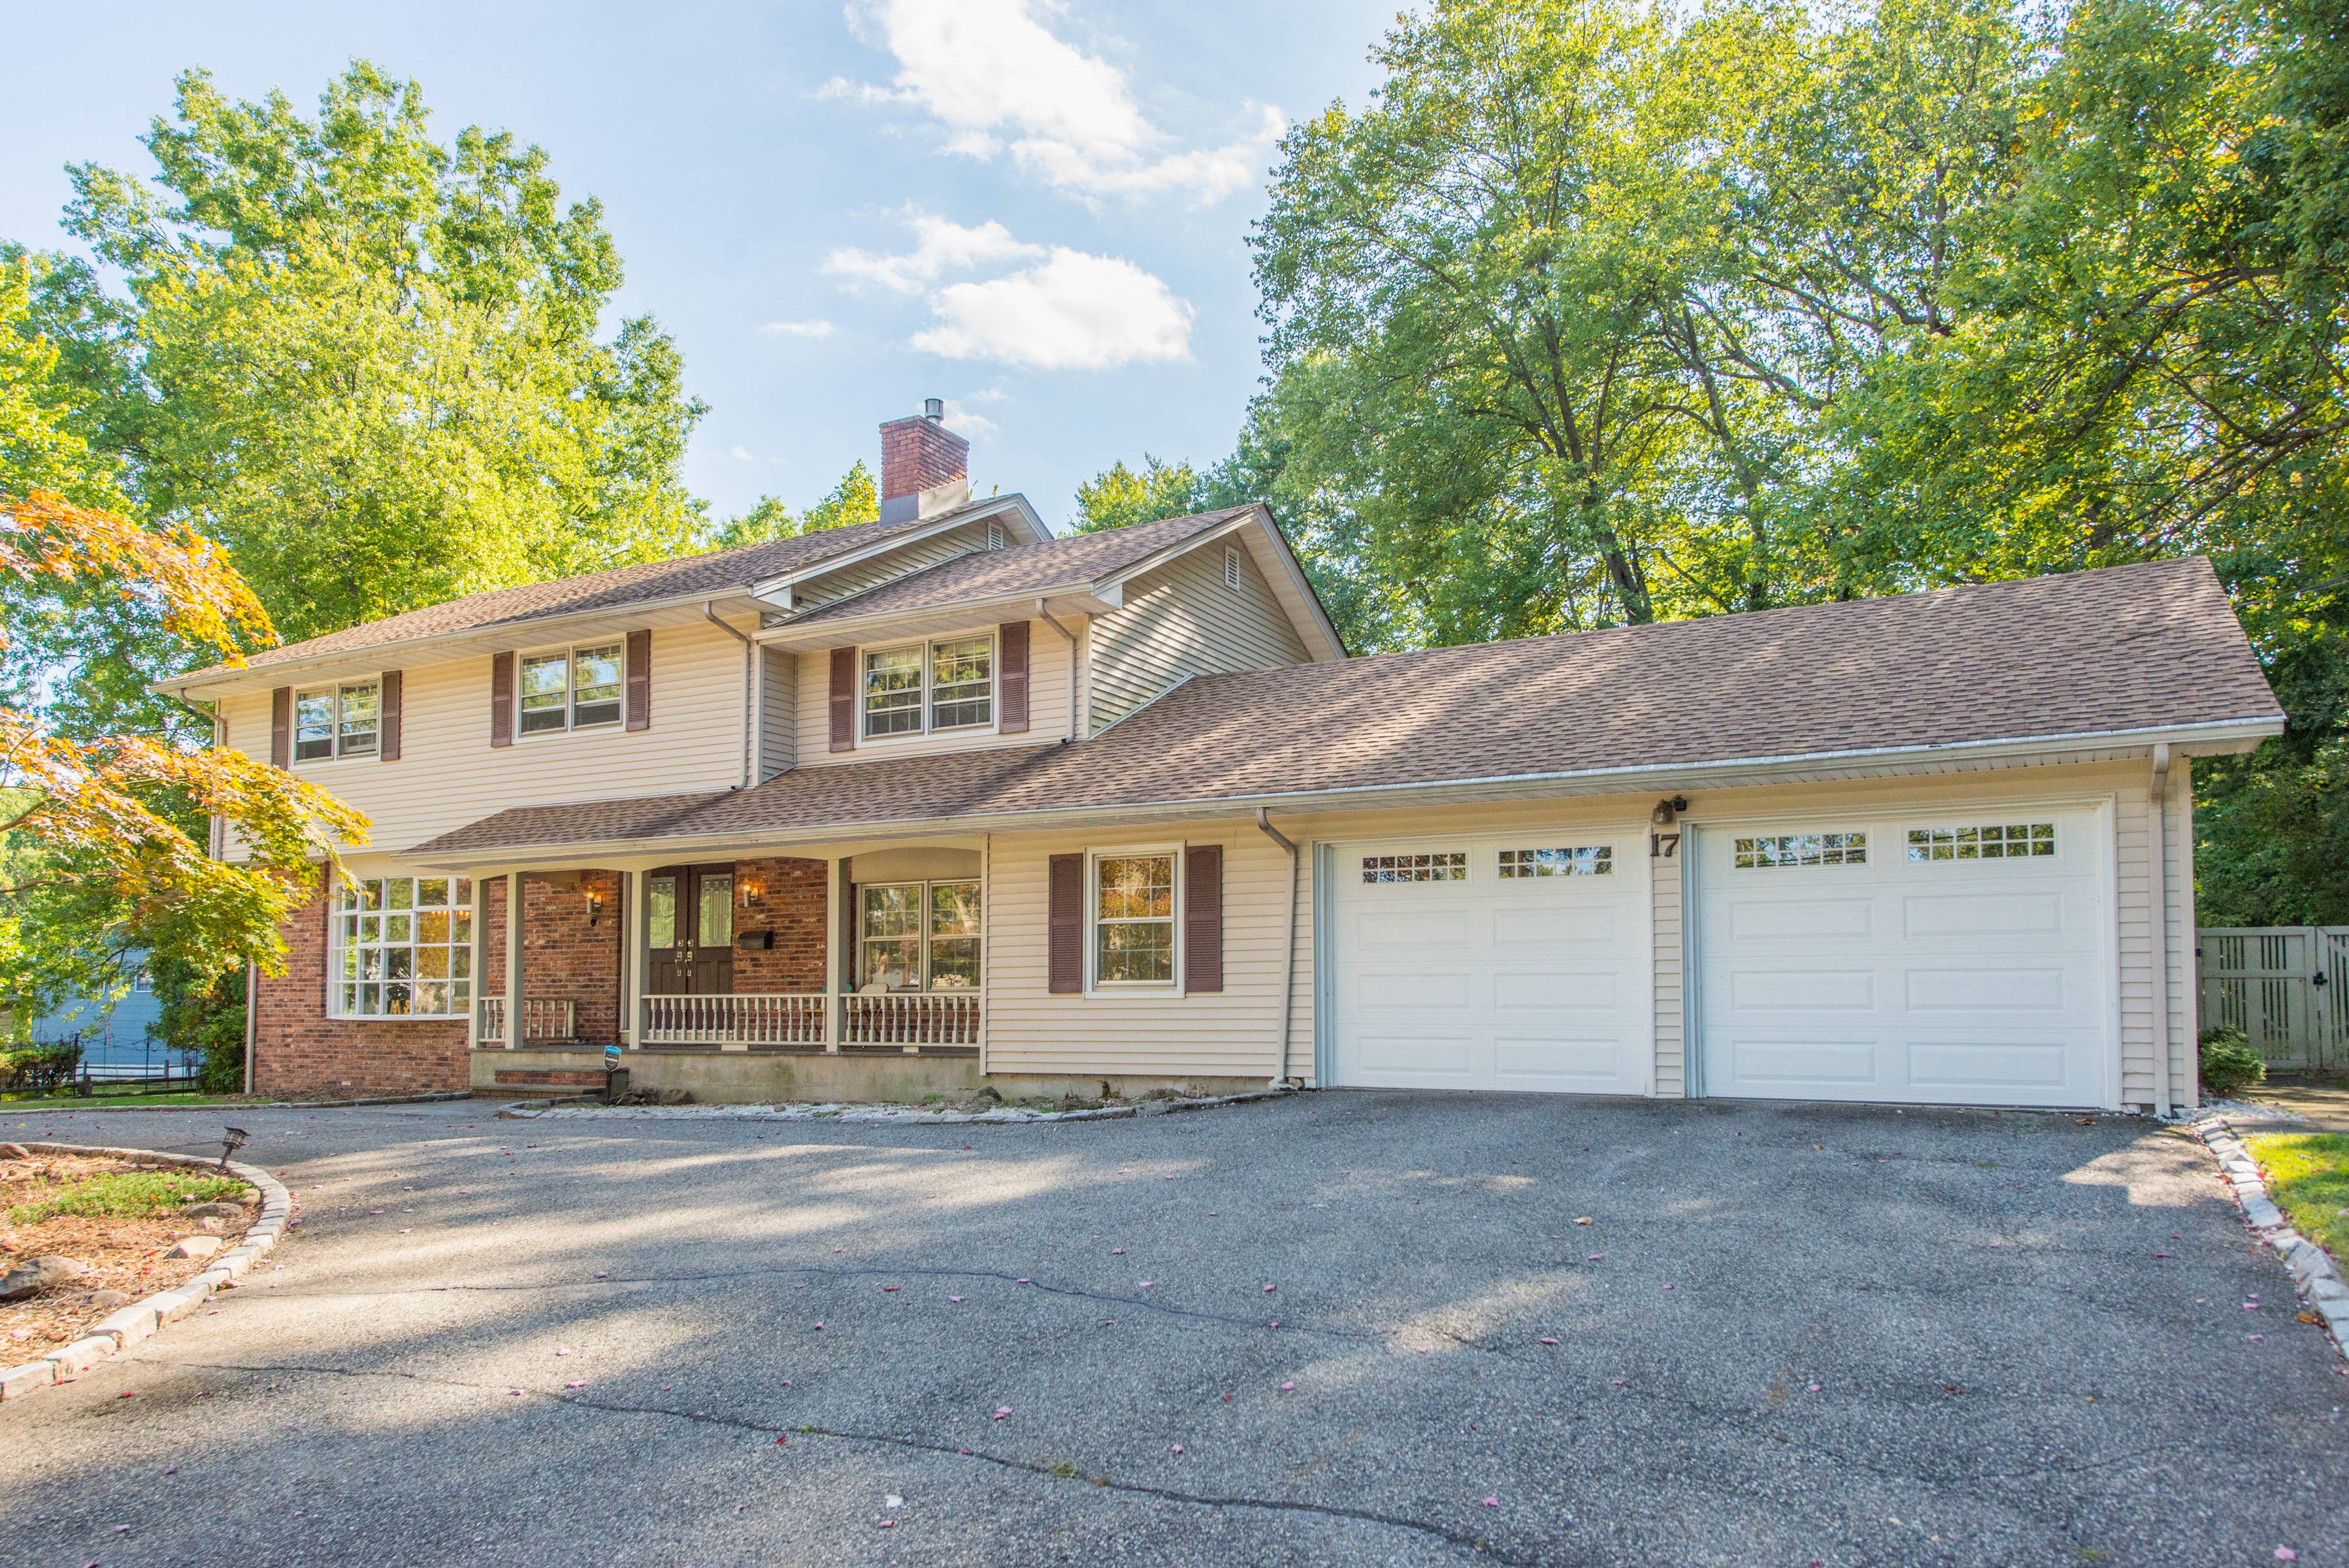 Lovely 5BR Colonial Exclusive in Desirable Riker Hill